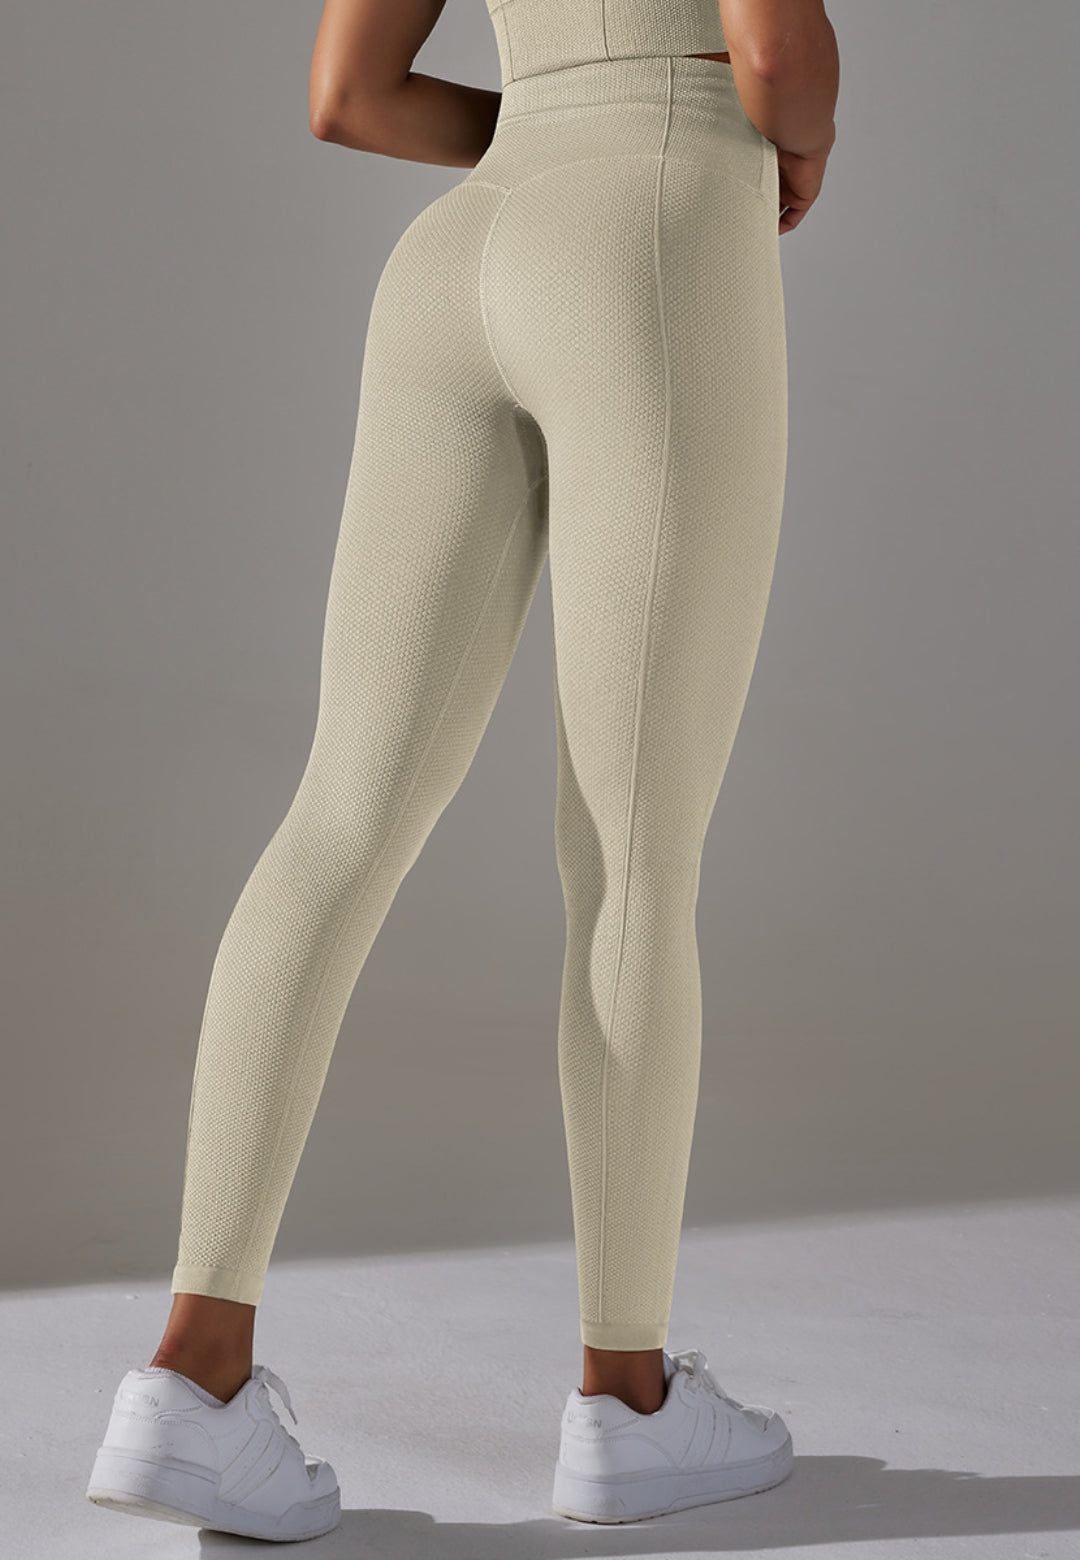 high Waist Middle Seam Leggings for you